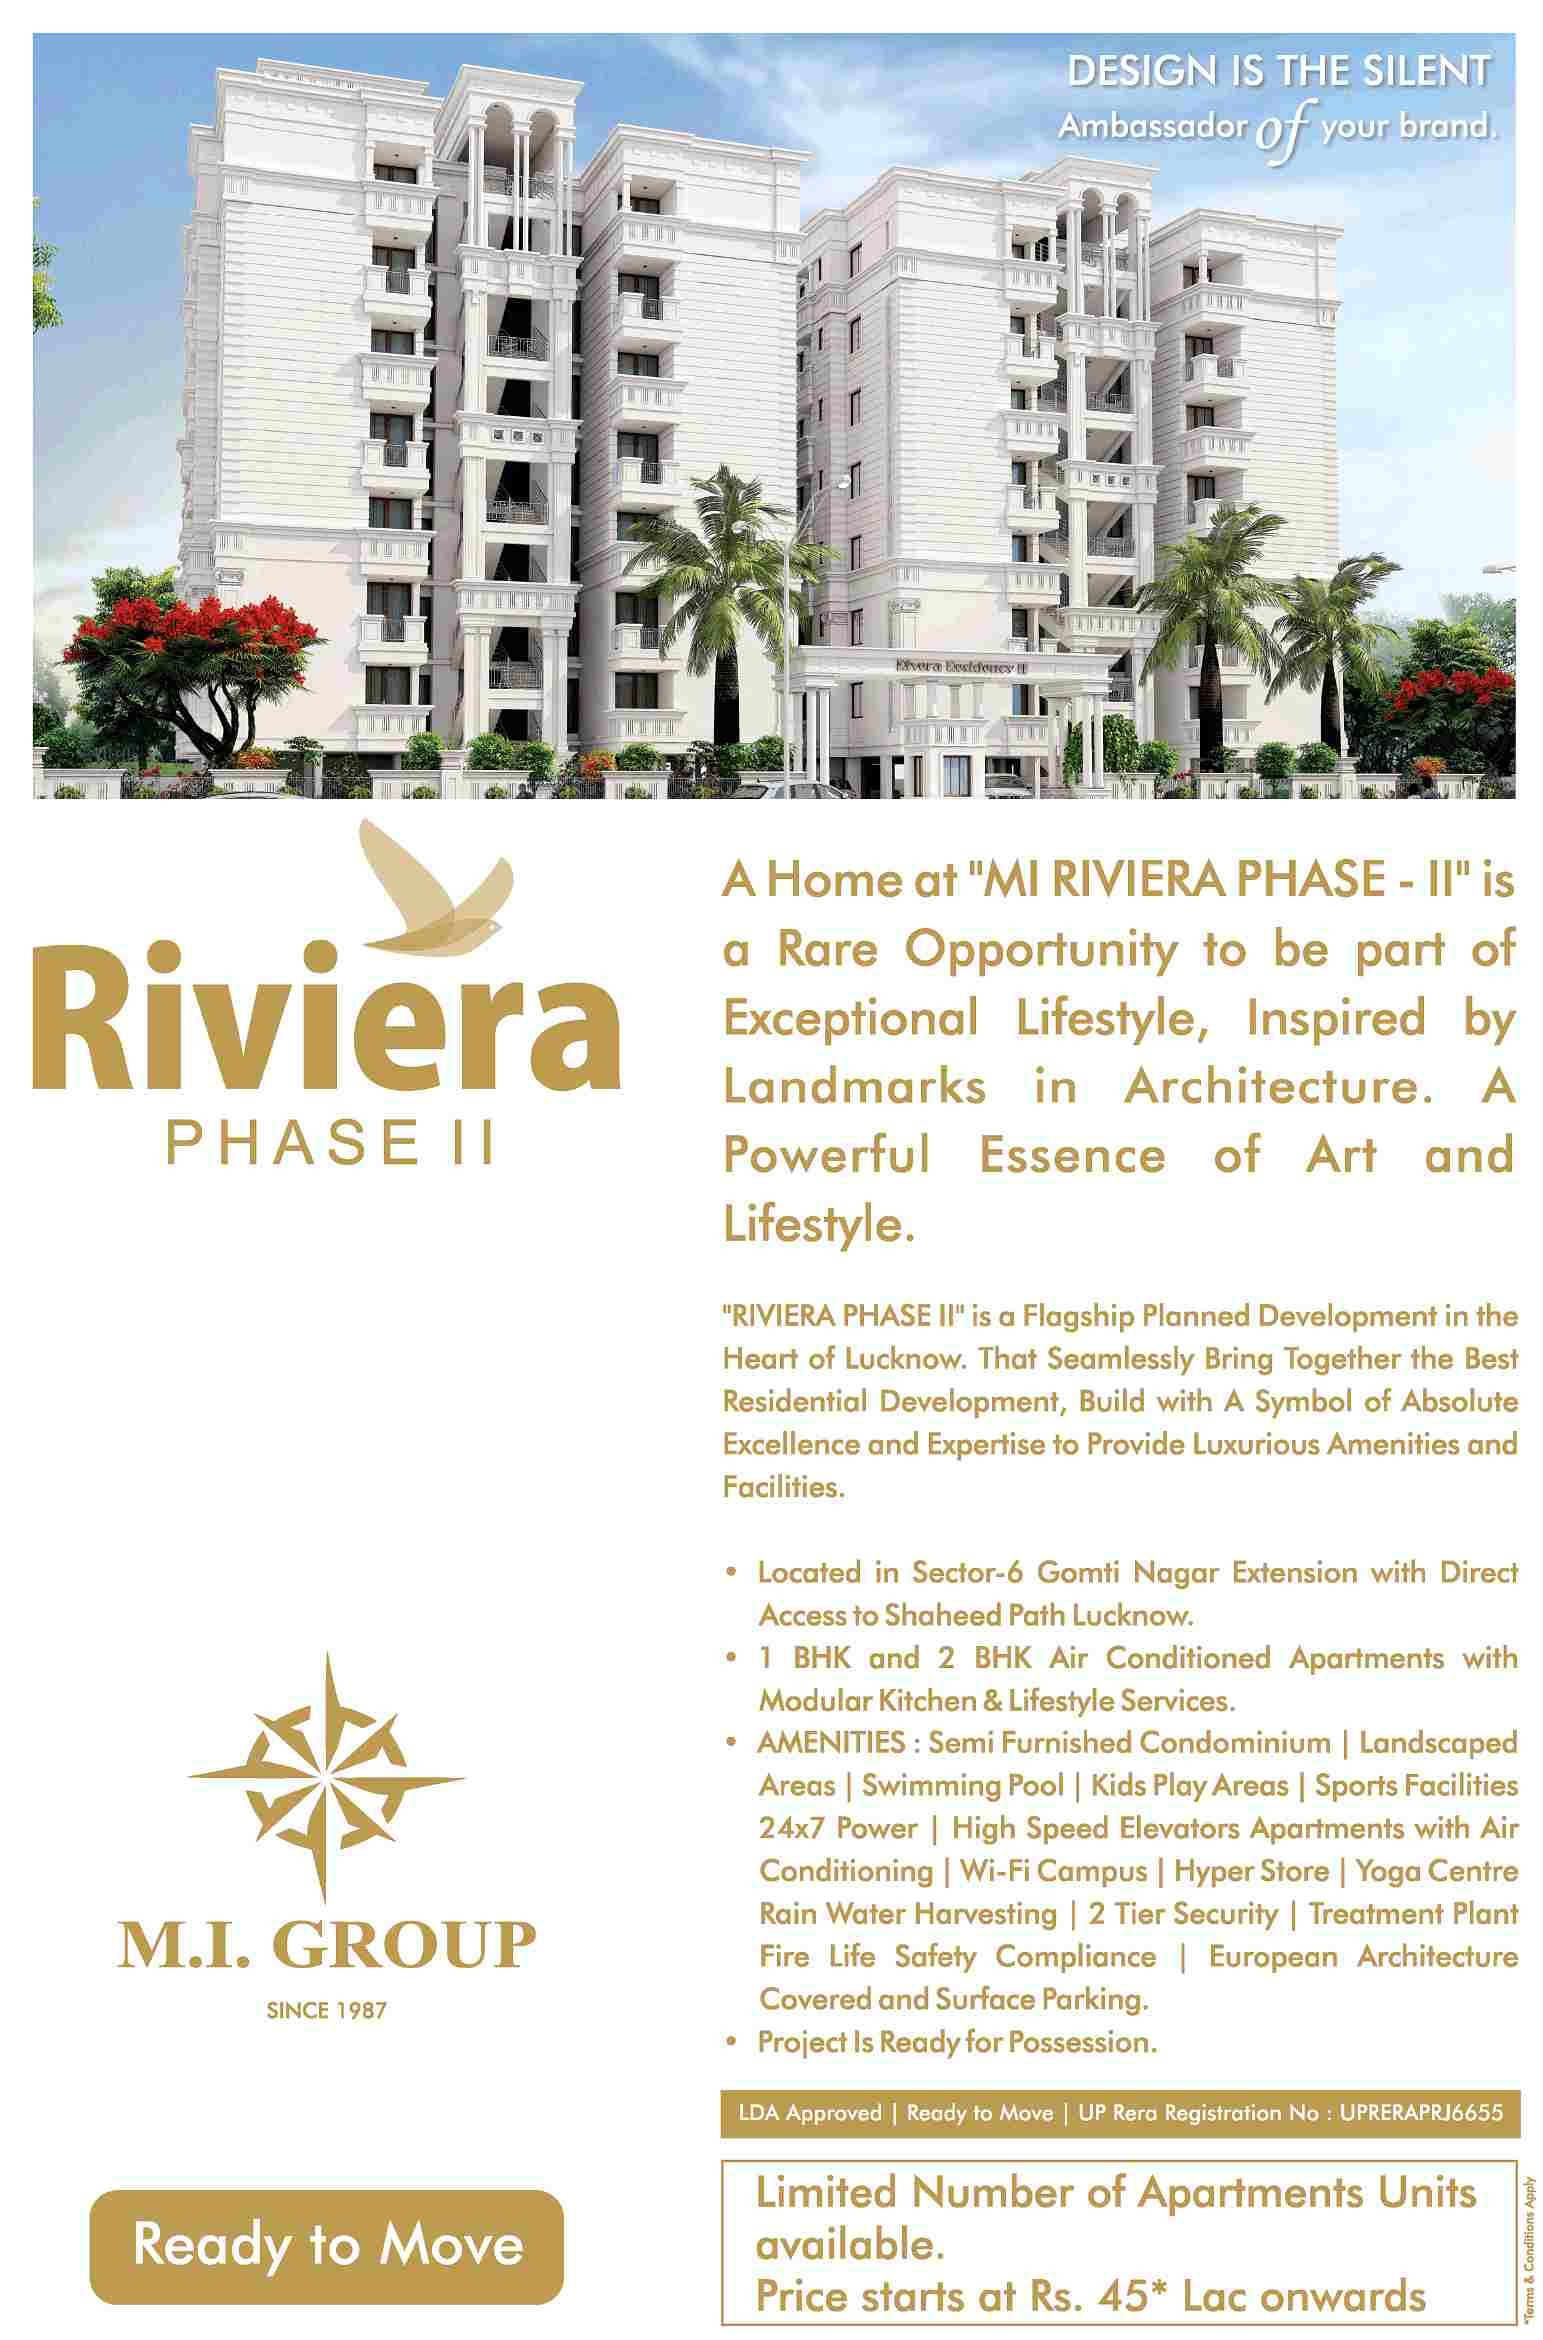 Book ready possession homes @ Rs 45 Lacs at MI Riviera Residency Phase 2 in Lucknow Update